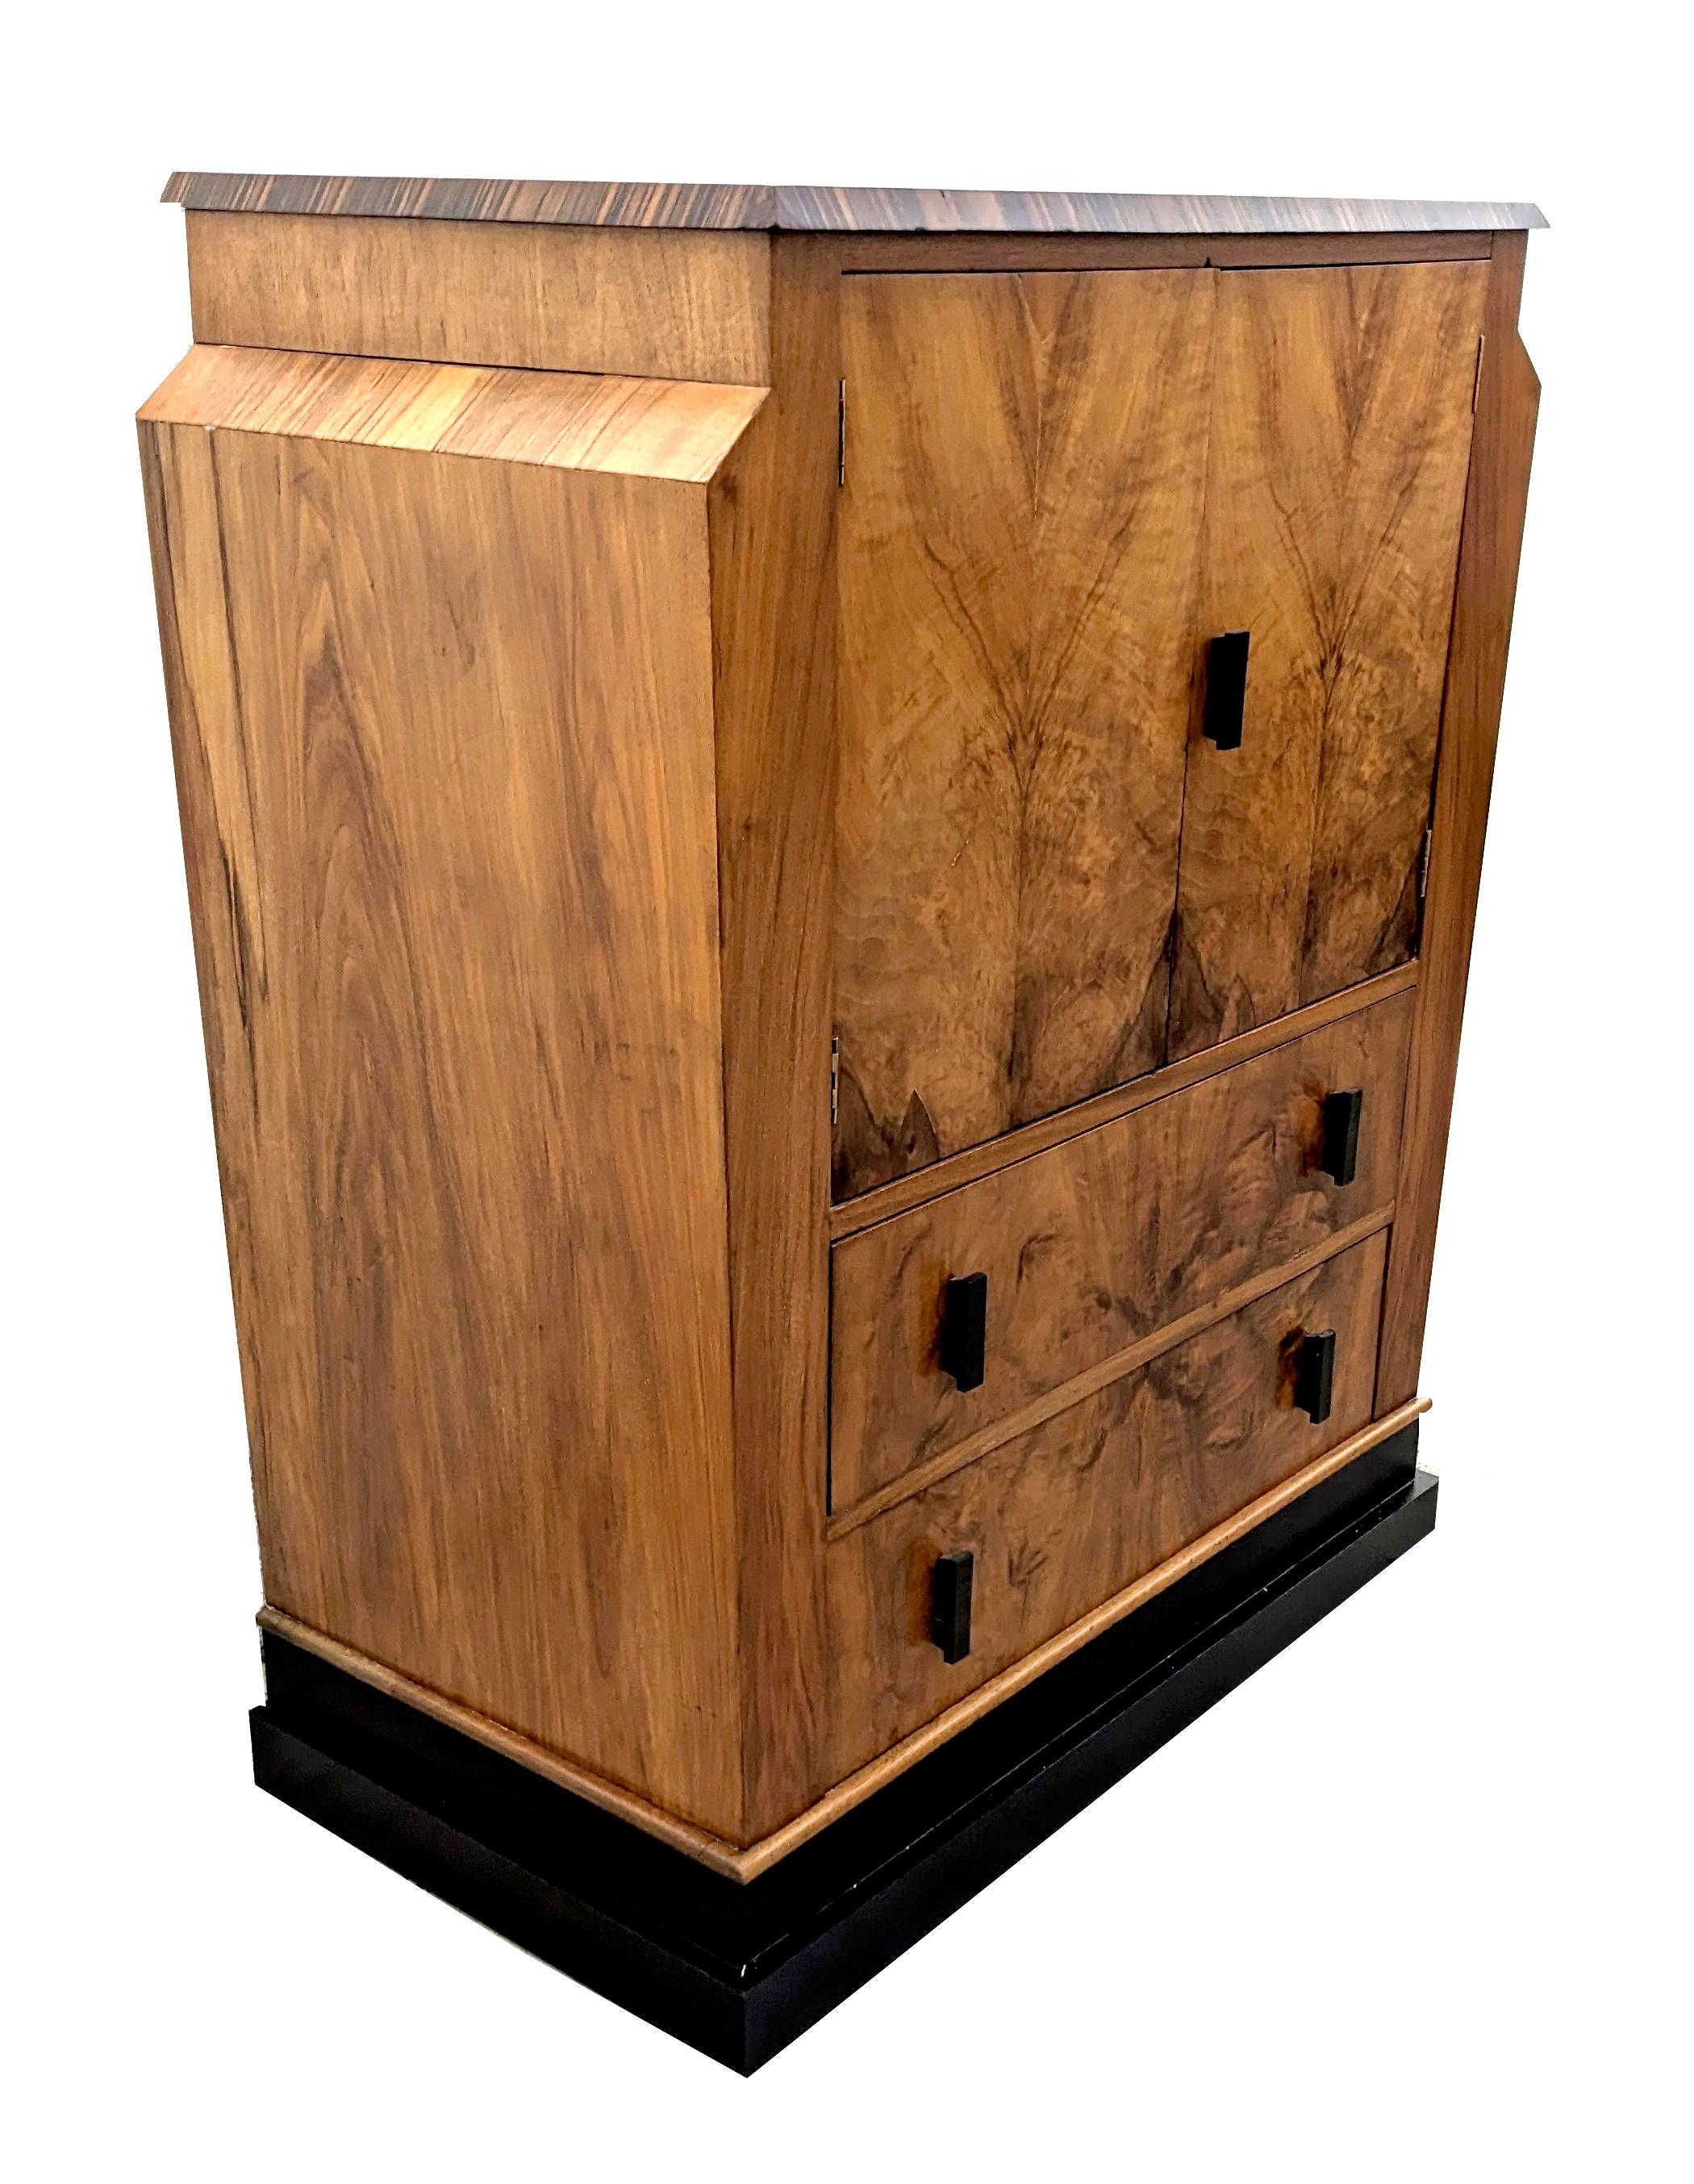 For those who collect Art Deco will know how hard it is to source genuinely good quality unique pieces that are iconic in style of this wonderful bygone era. For your consideration is this fabulous Art Deco Walnut tallboy dating to the 1930's.